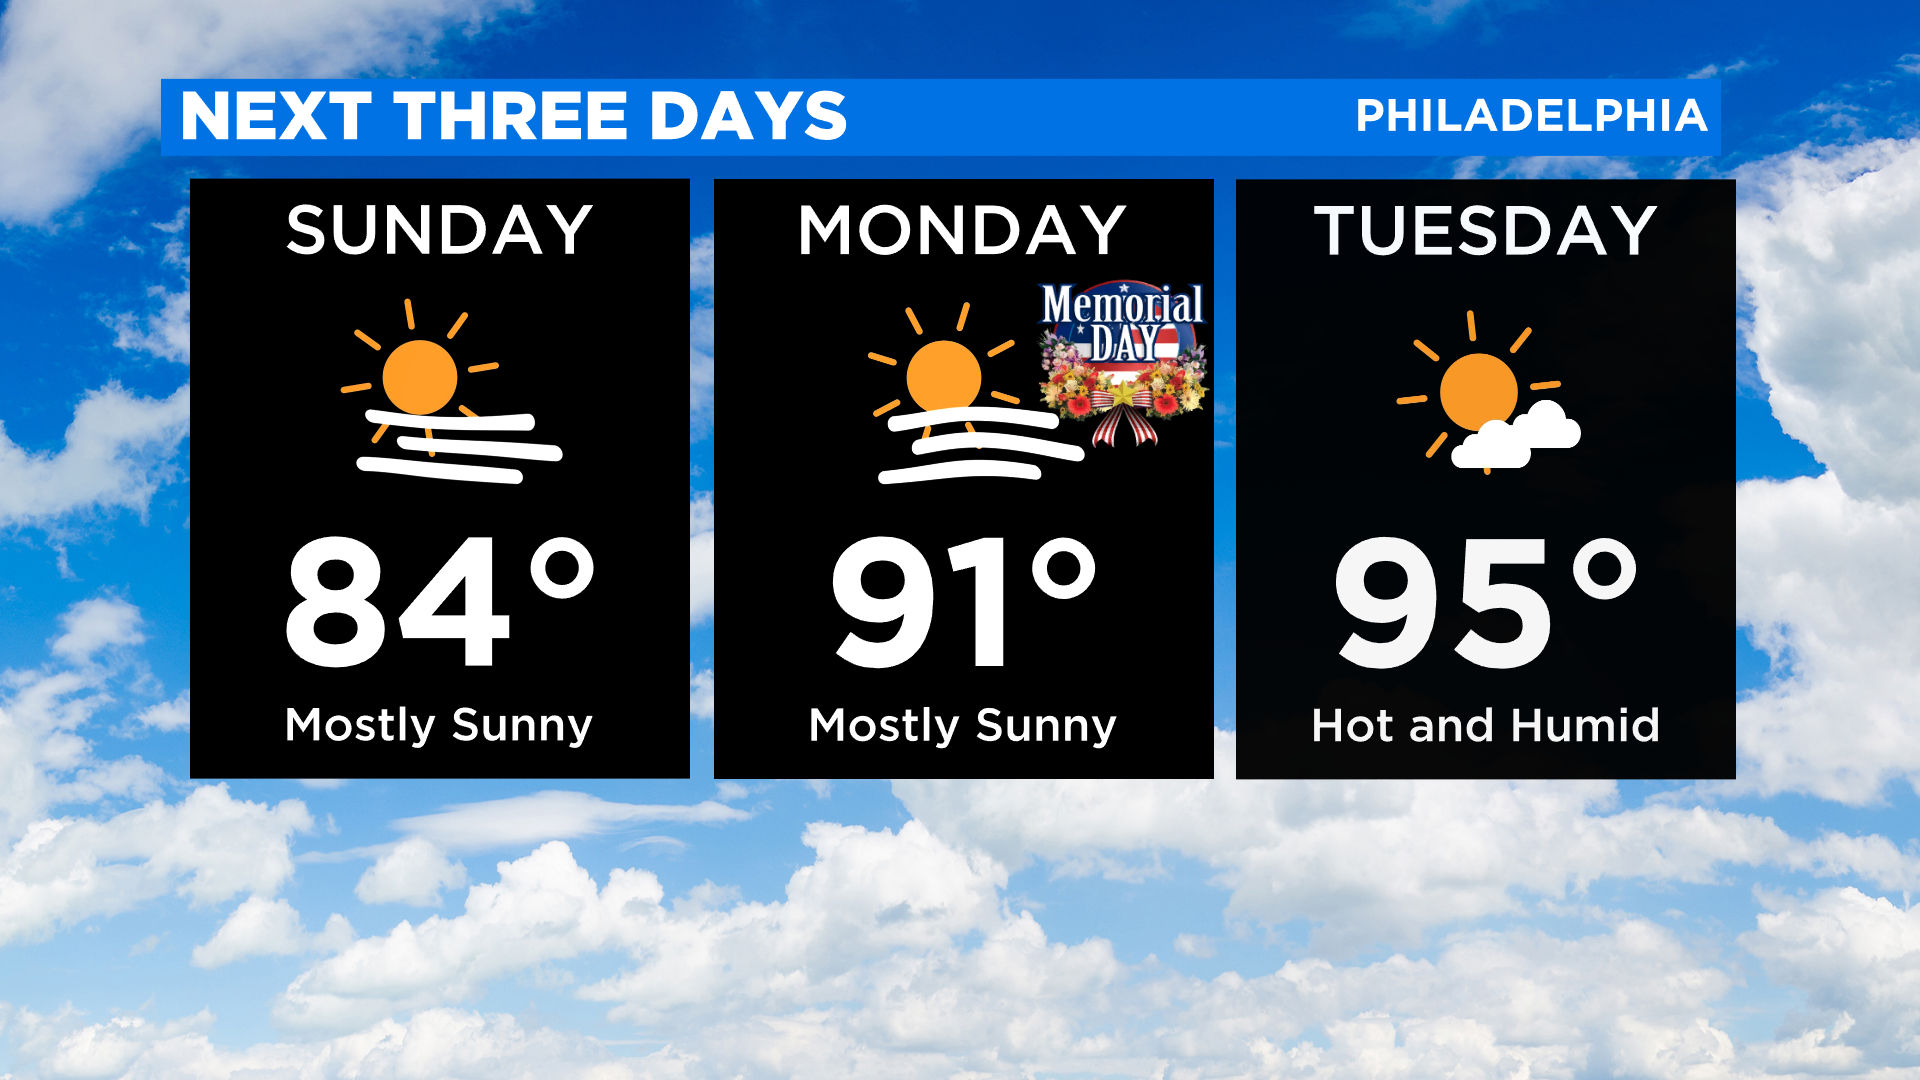 90’s Arrive For Memorial Day Before First Possible Heat Wave Later In The Week – CBS Philly